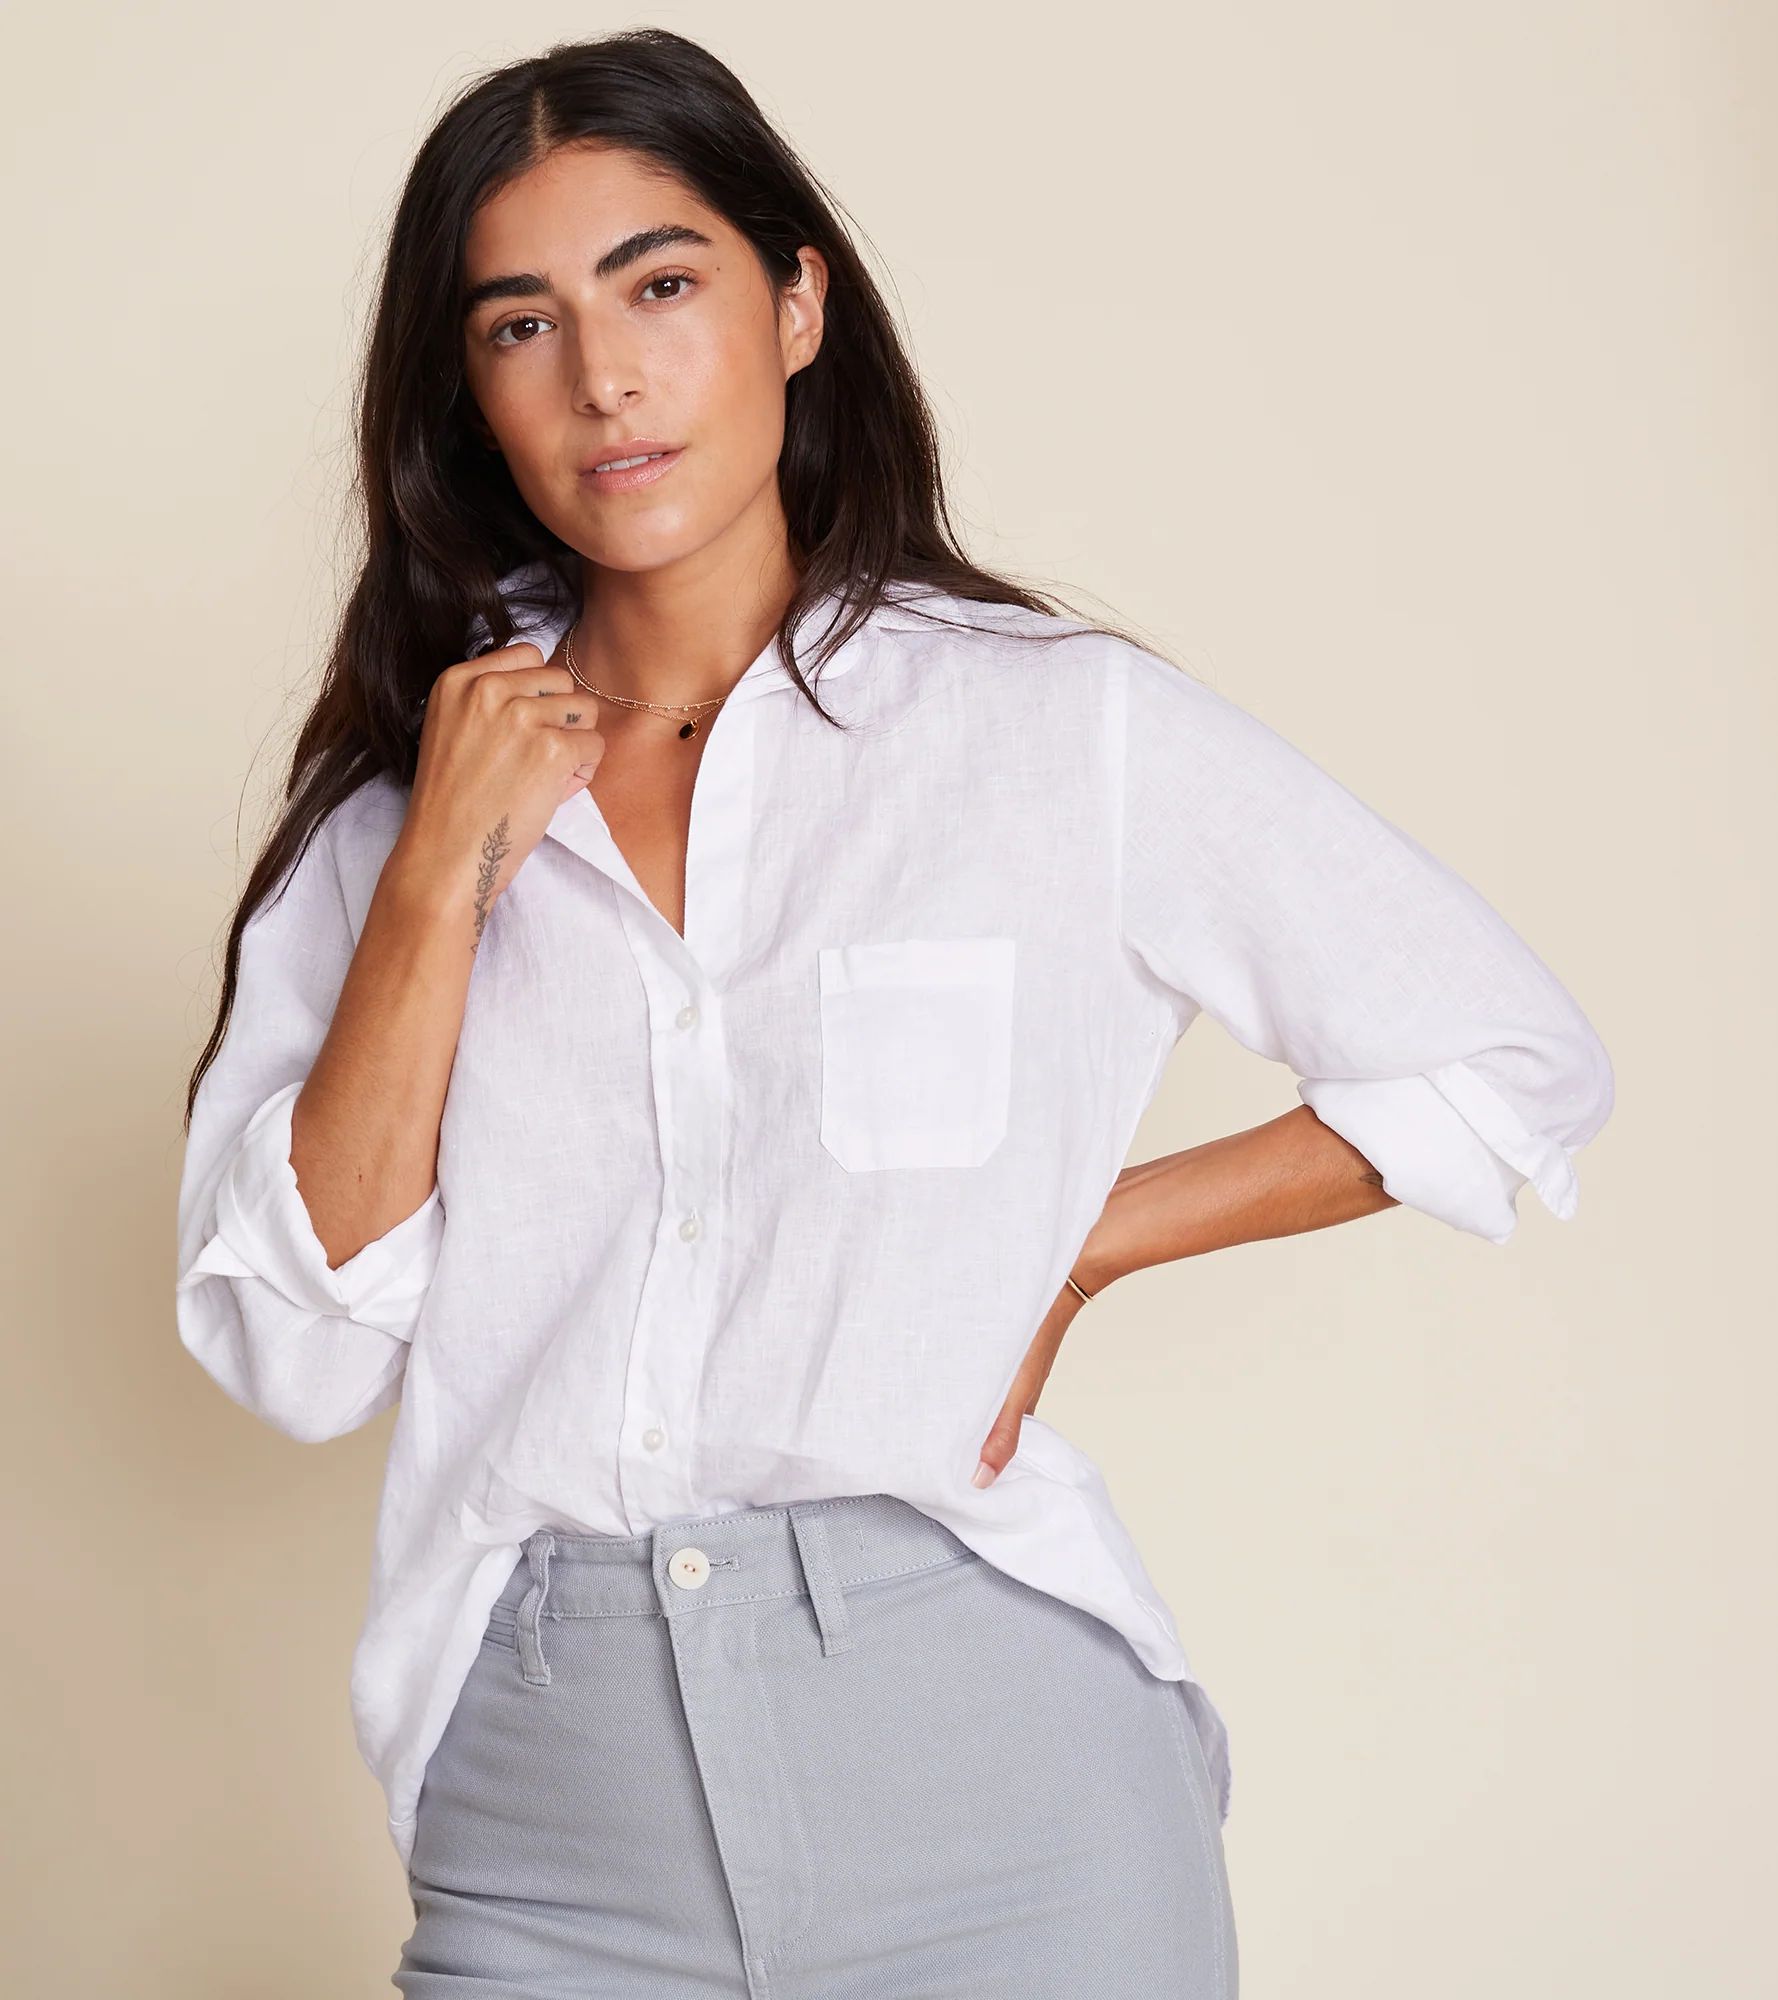 The Hero Button-Up Shirt Classic White, Tumbled Linen Final Sale | Grayson